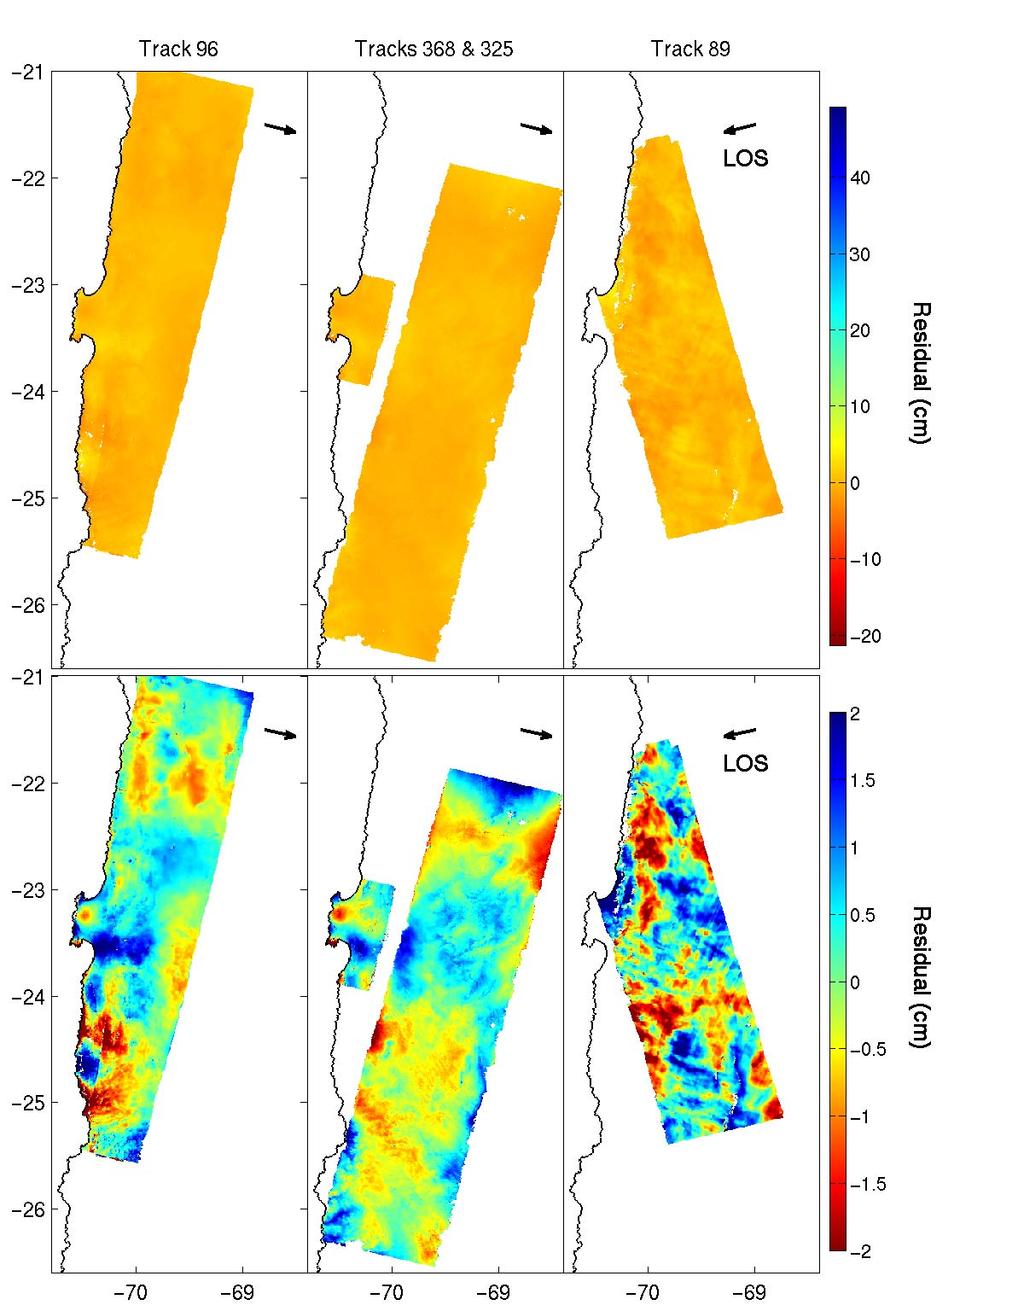 120 Figure 3.11: Residual of InSAR data from the preferred model for the four satellite tracks shown in Figure 3.5. The color scale used for displaying the data in Figure 3.